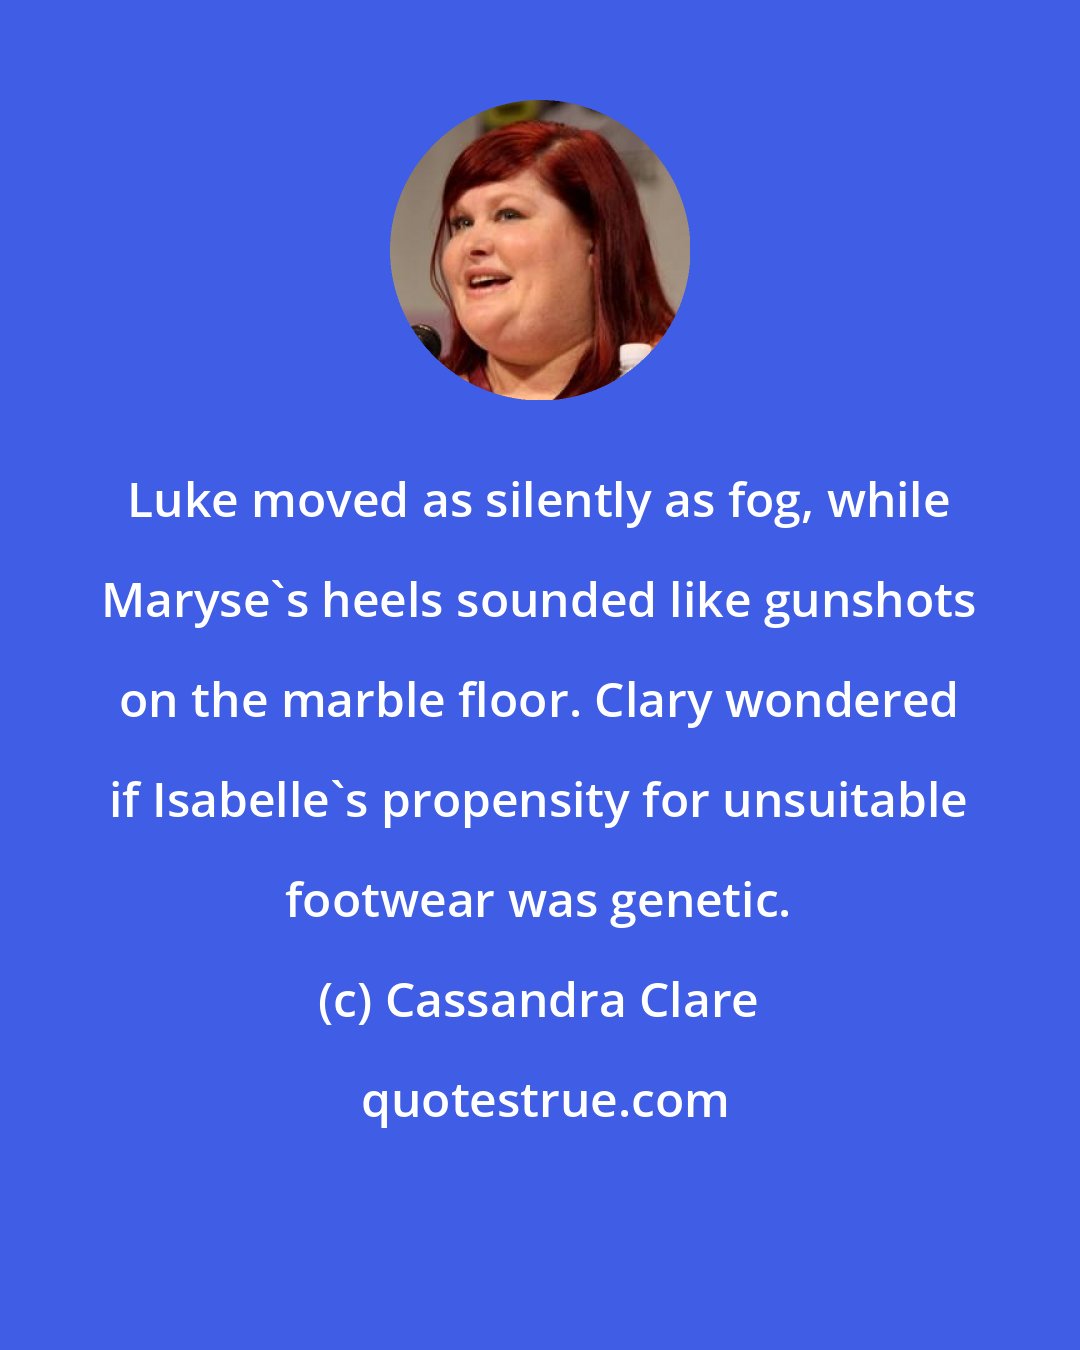 Cassandra Clare: Luke moved as silently as fog, while Maryse's heels sounded like gunshots on the marble floor. Clary wondered if Isabelle's propensity for unsuitable footwear was genetic.